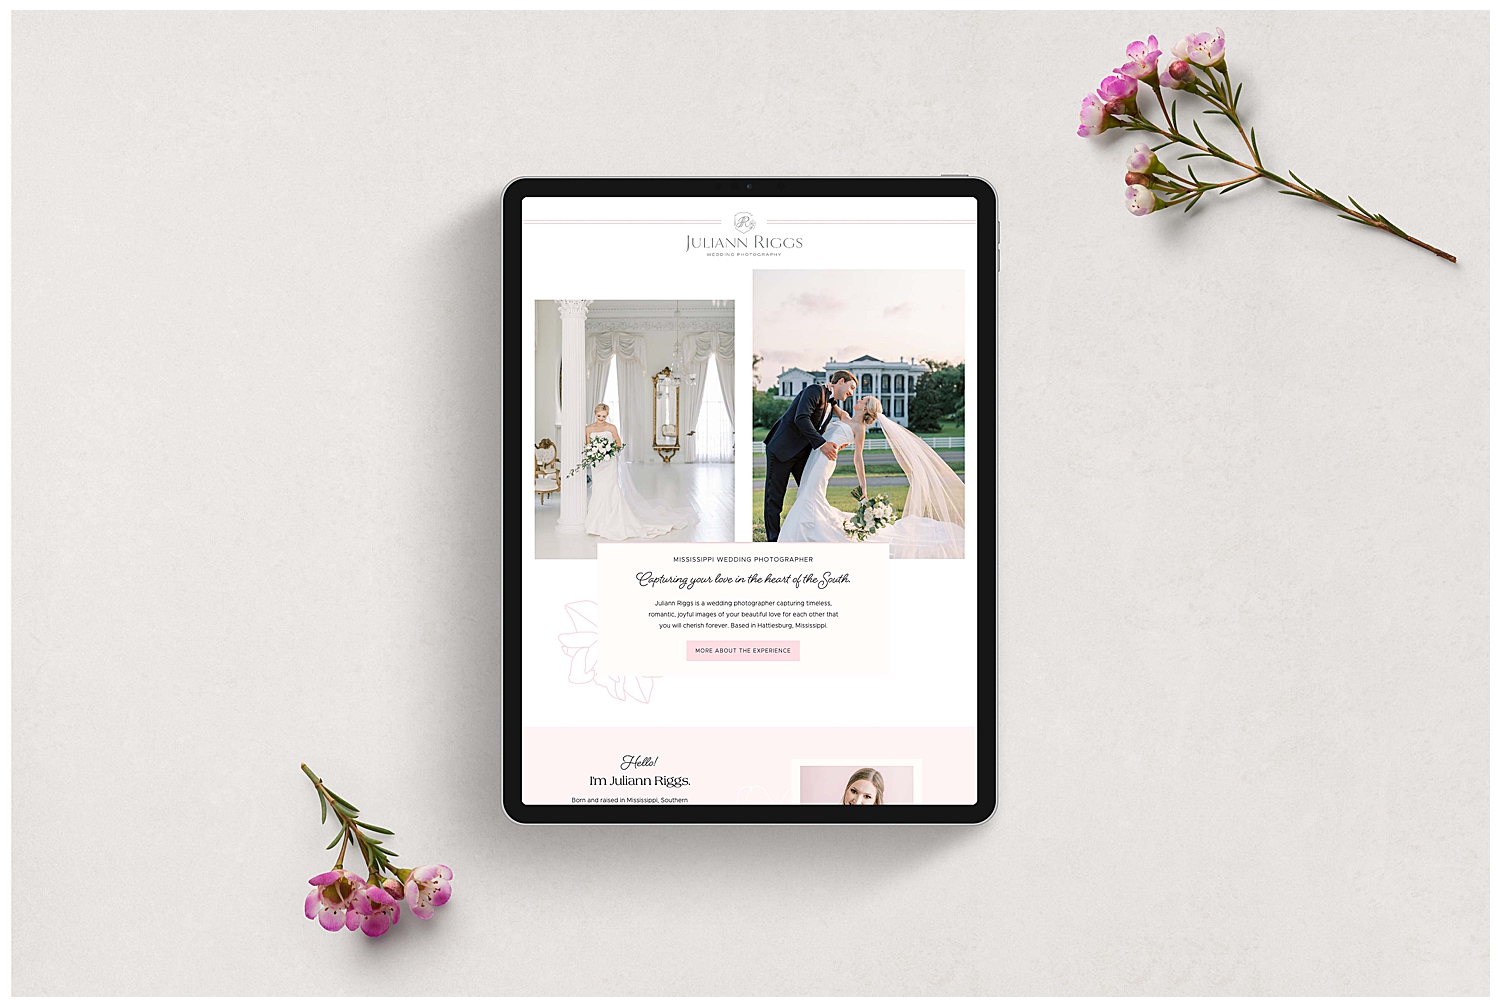 An iPad sits on the table with Juliann Riggs Photograph's website pulled up.